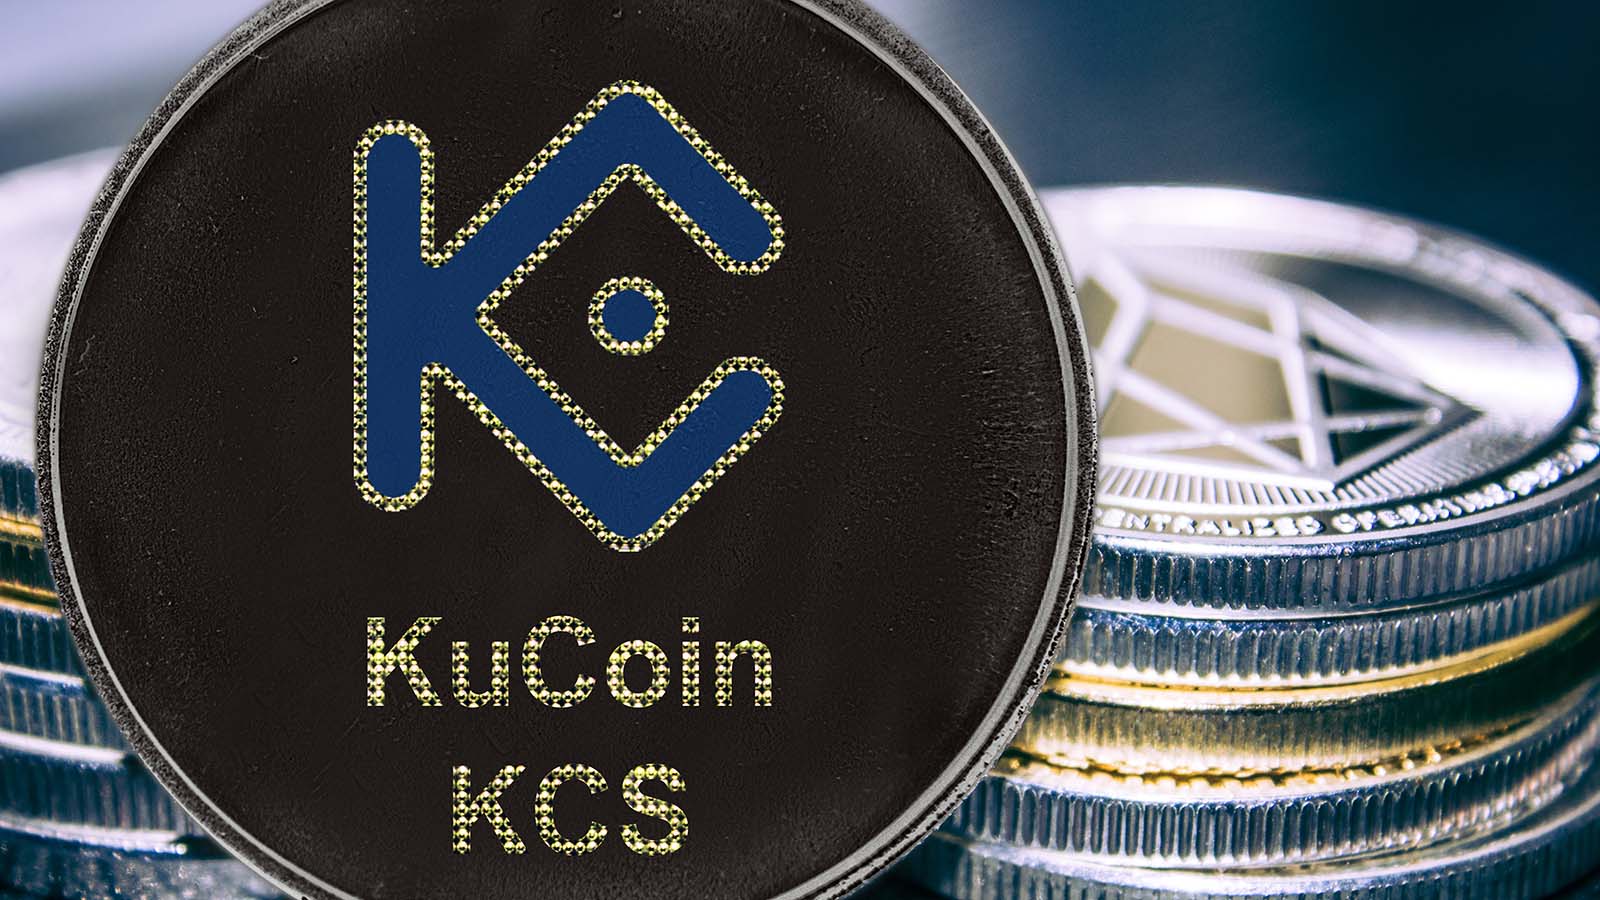 KuCoin Exchange Releases KCS Whitepaper With Details About KCS Foundation And Ecosystem